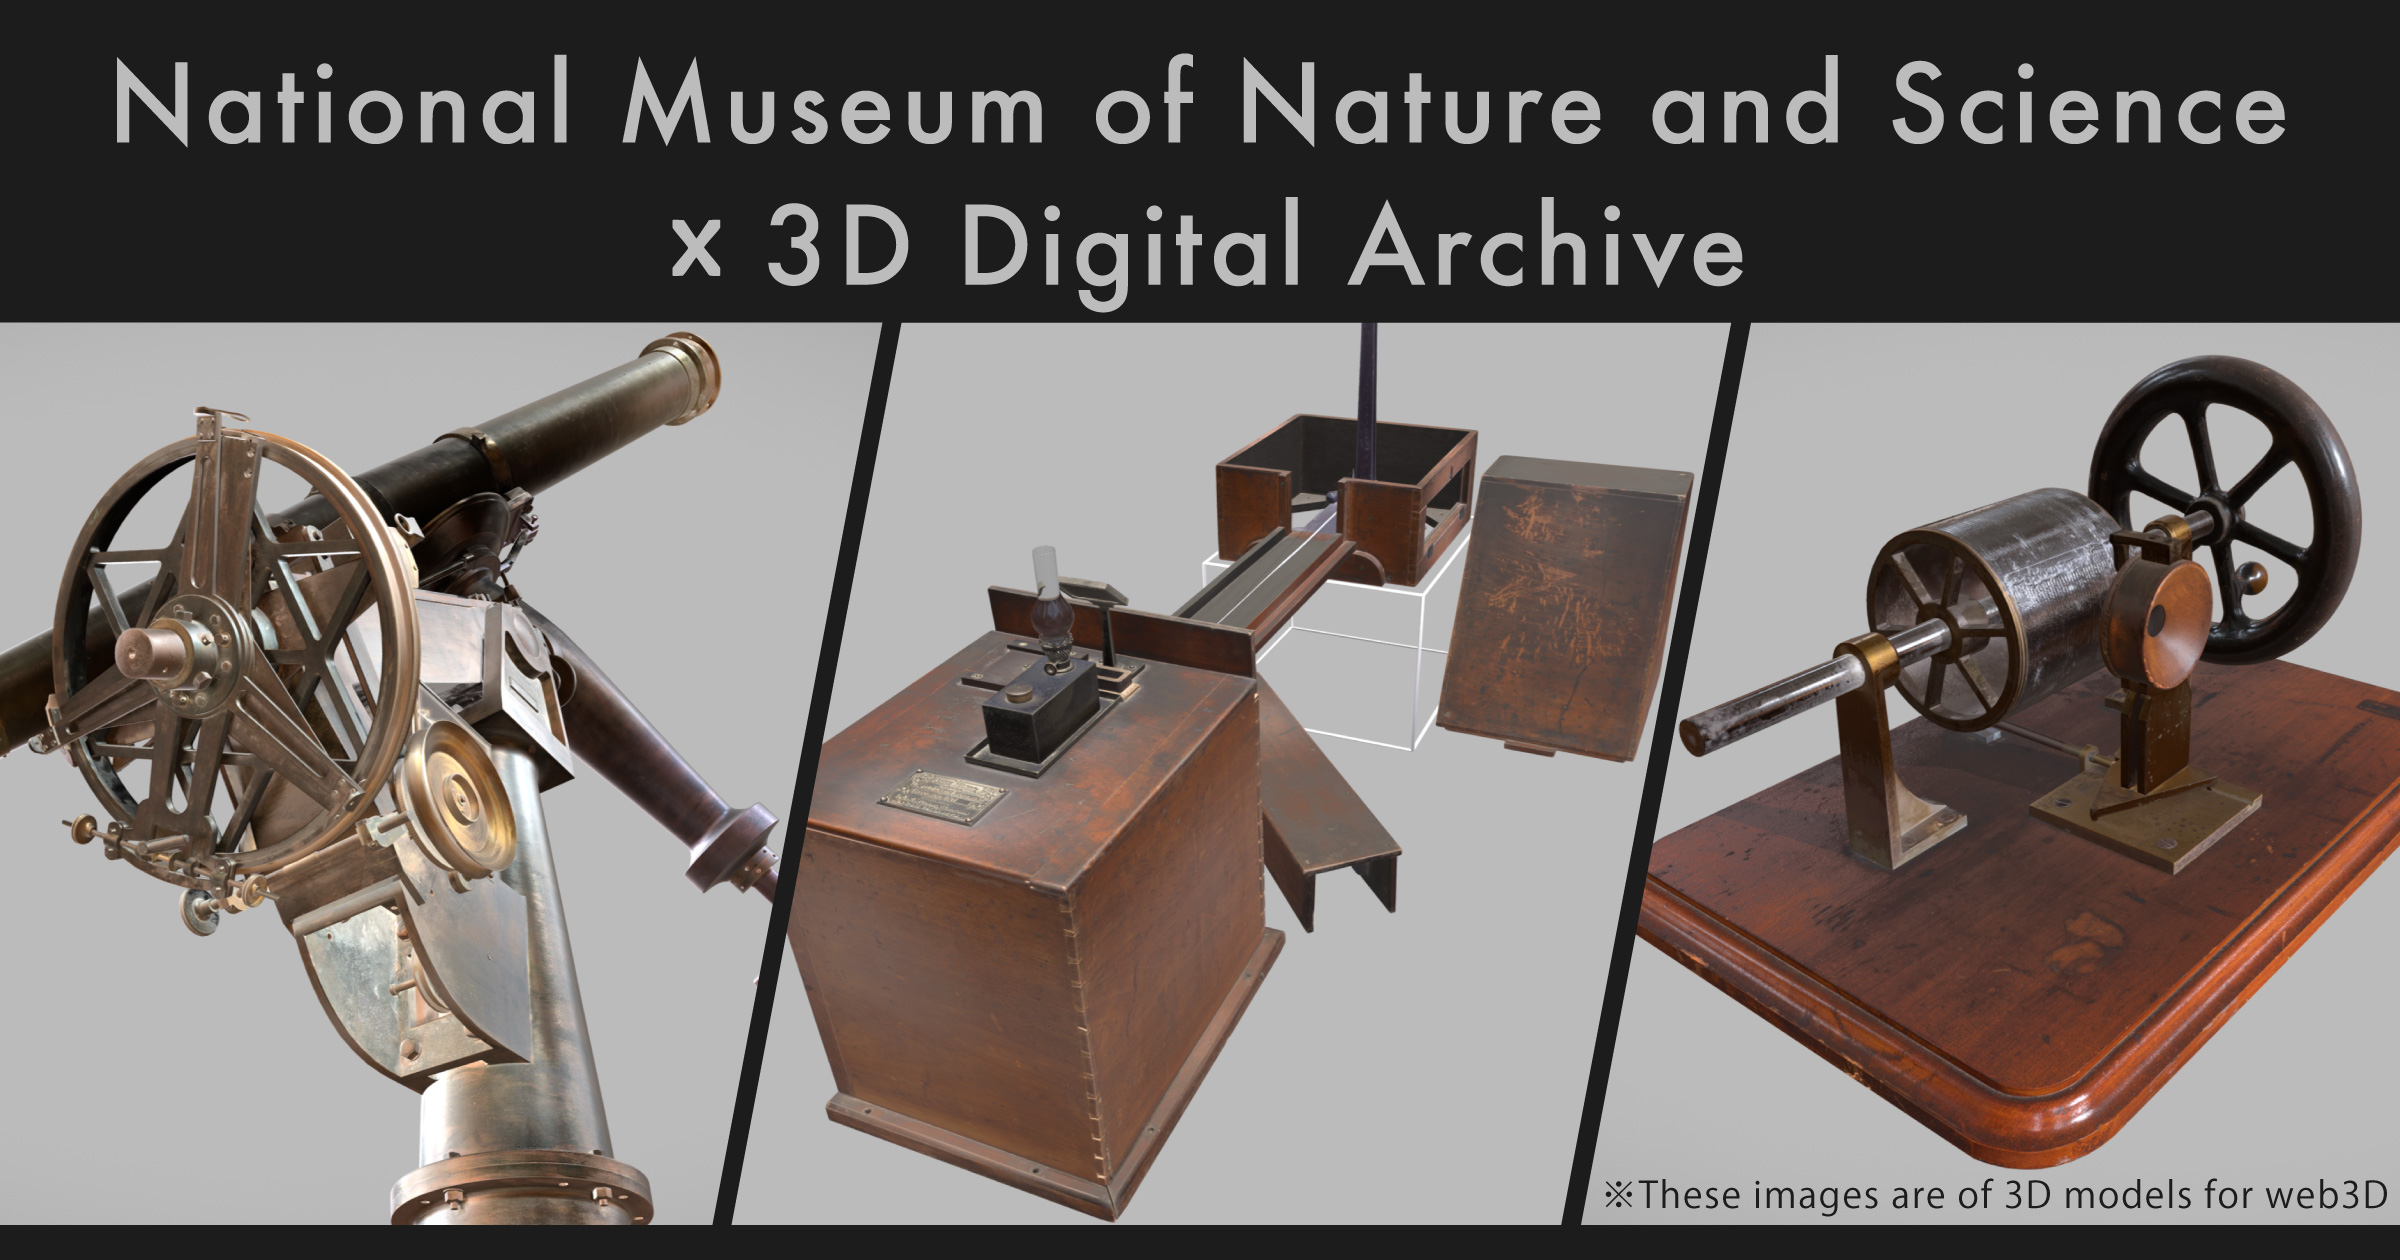 The development of a 3D digital archive by the National Museum of Nature and Science.